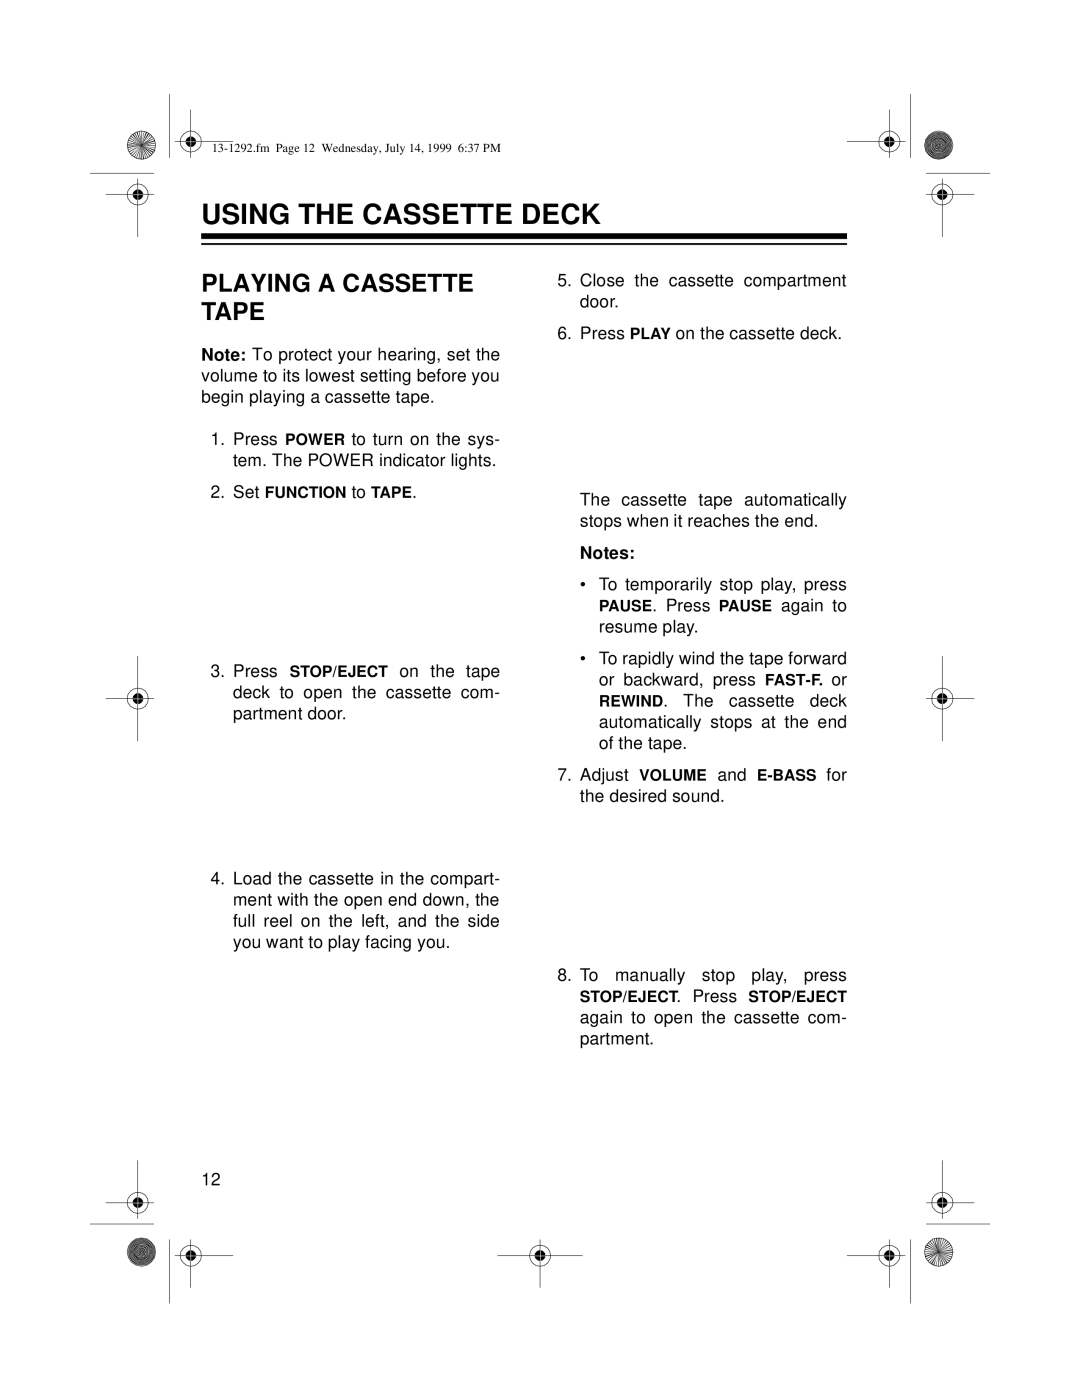 Optimus 739 owner manual Using The Cassette Deck, Playing A Cassette Tape 